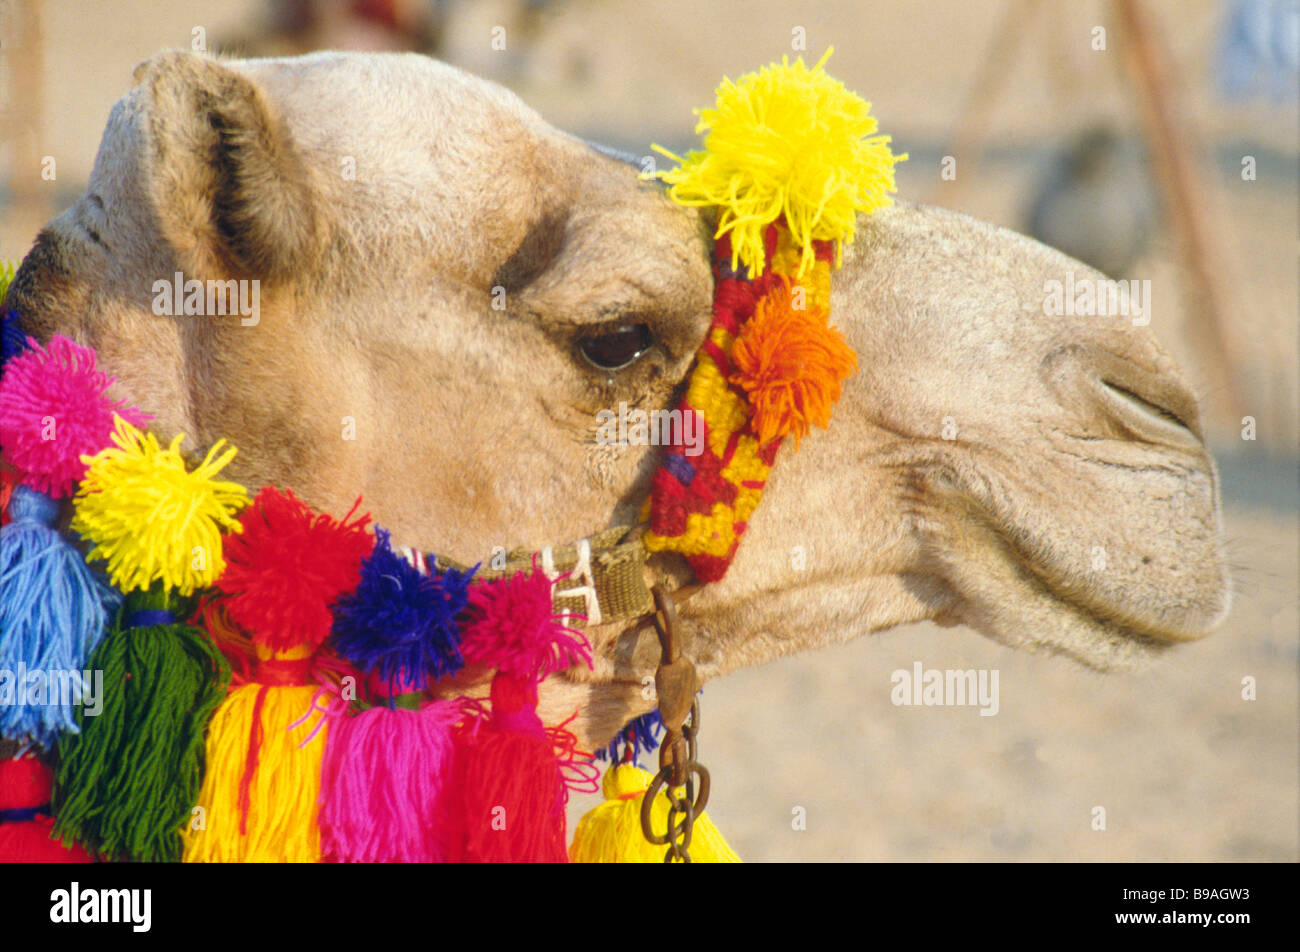 Camels head with decorative bright coloured woolen bridle. Egypt Stock Photo